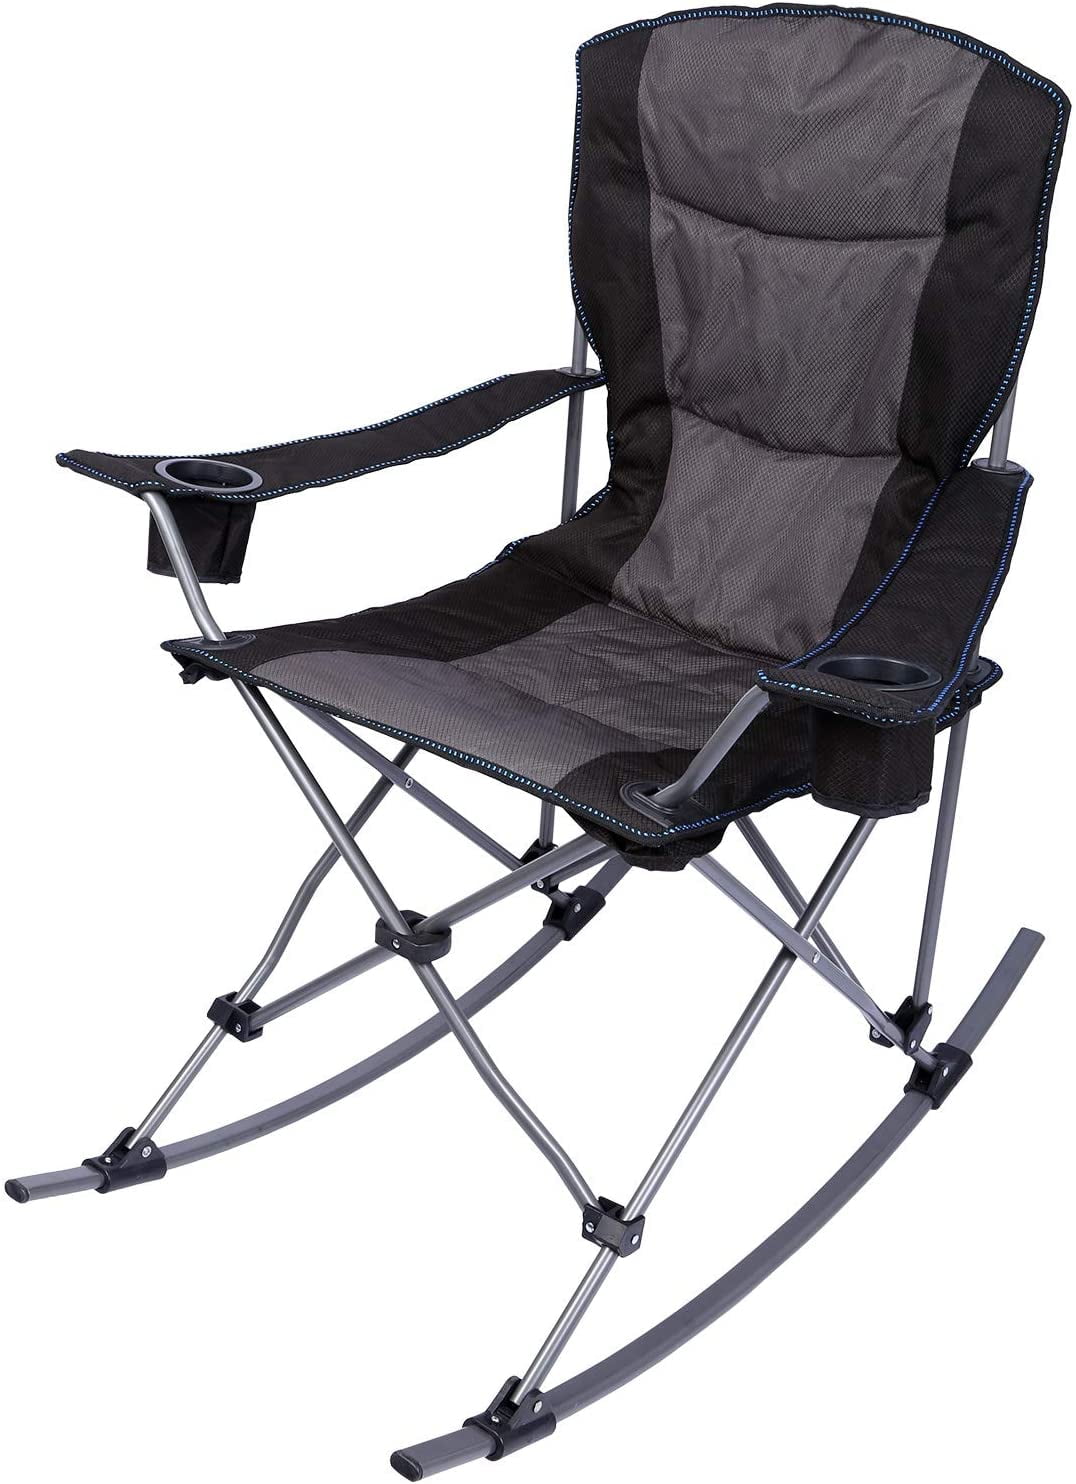 REDCAMP Folding Rocking Chairs Outdoor Heavy Duty